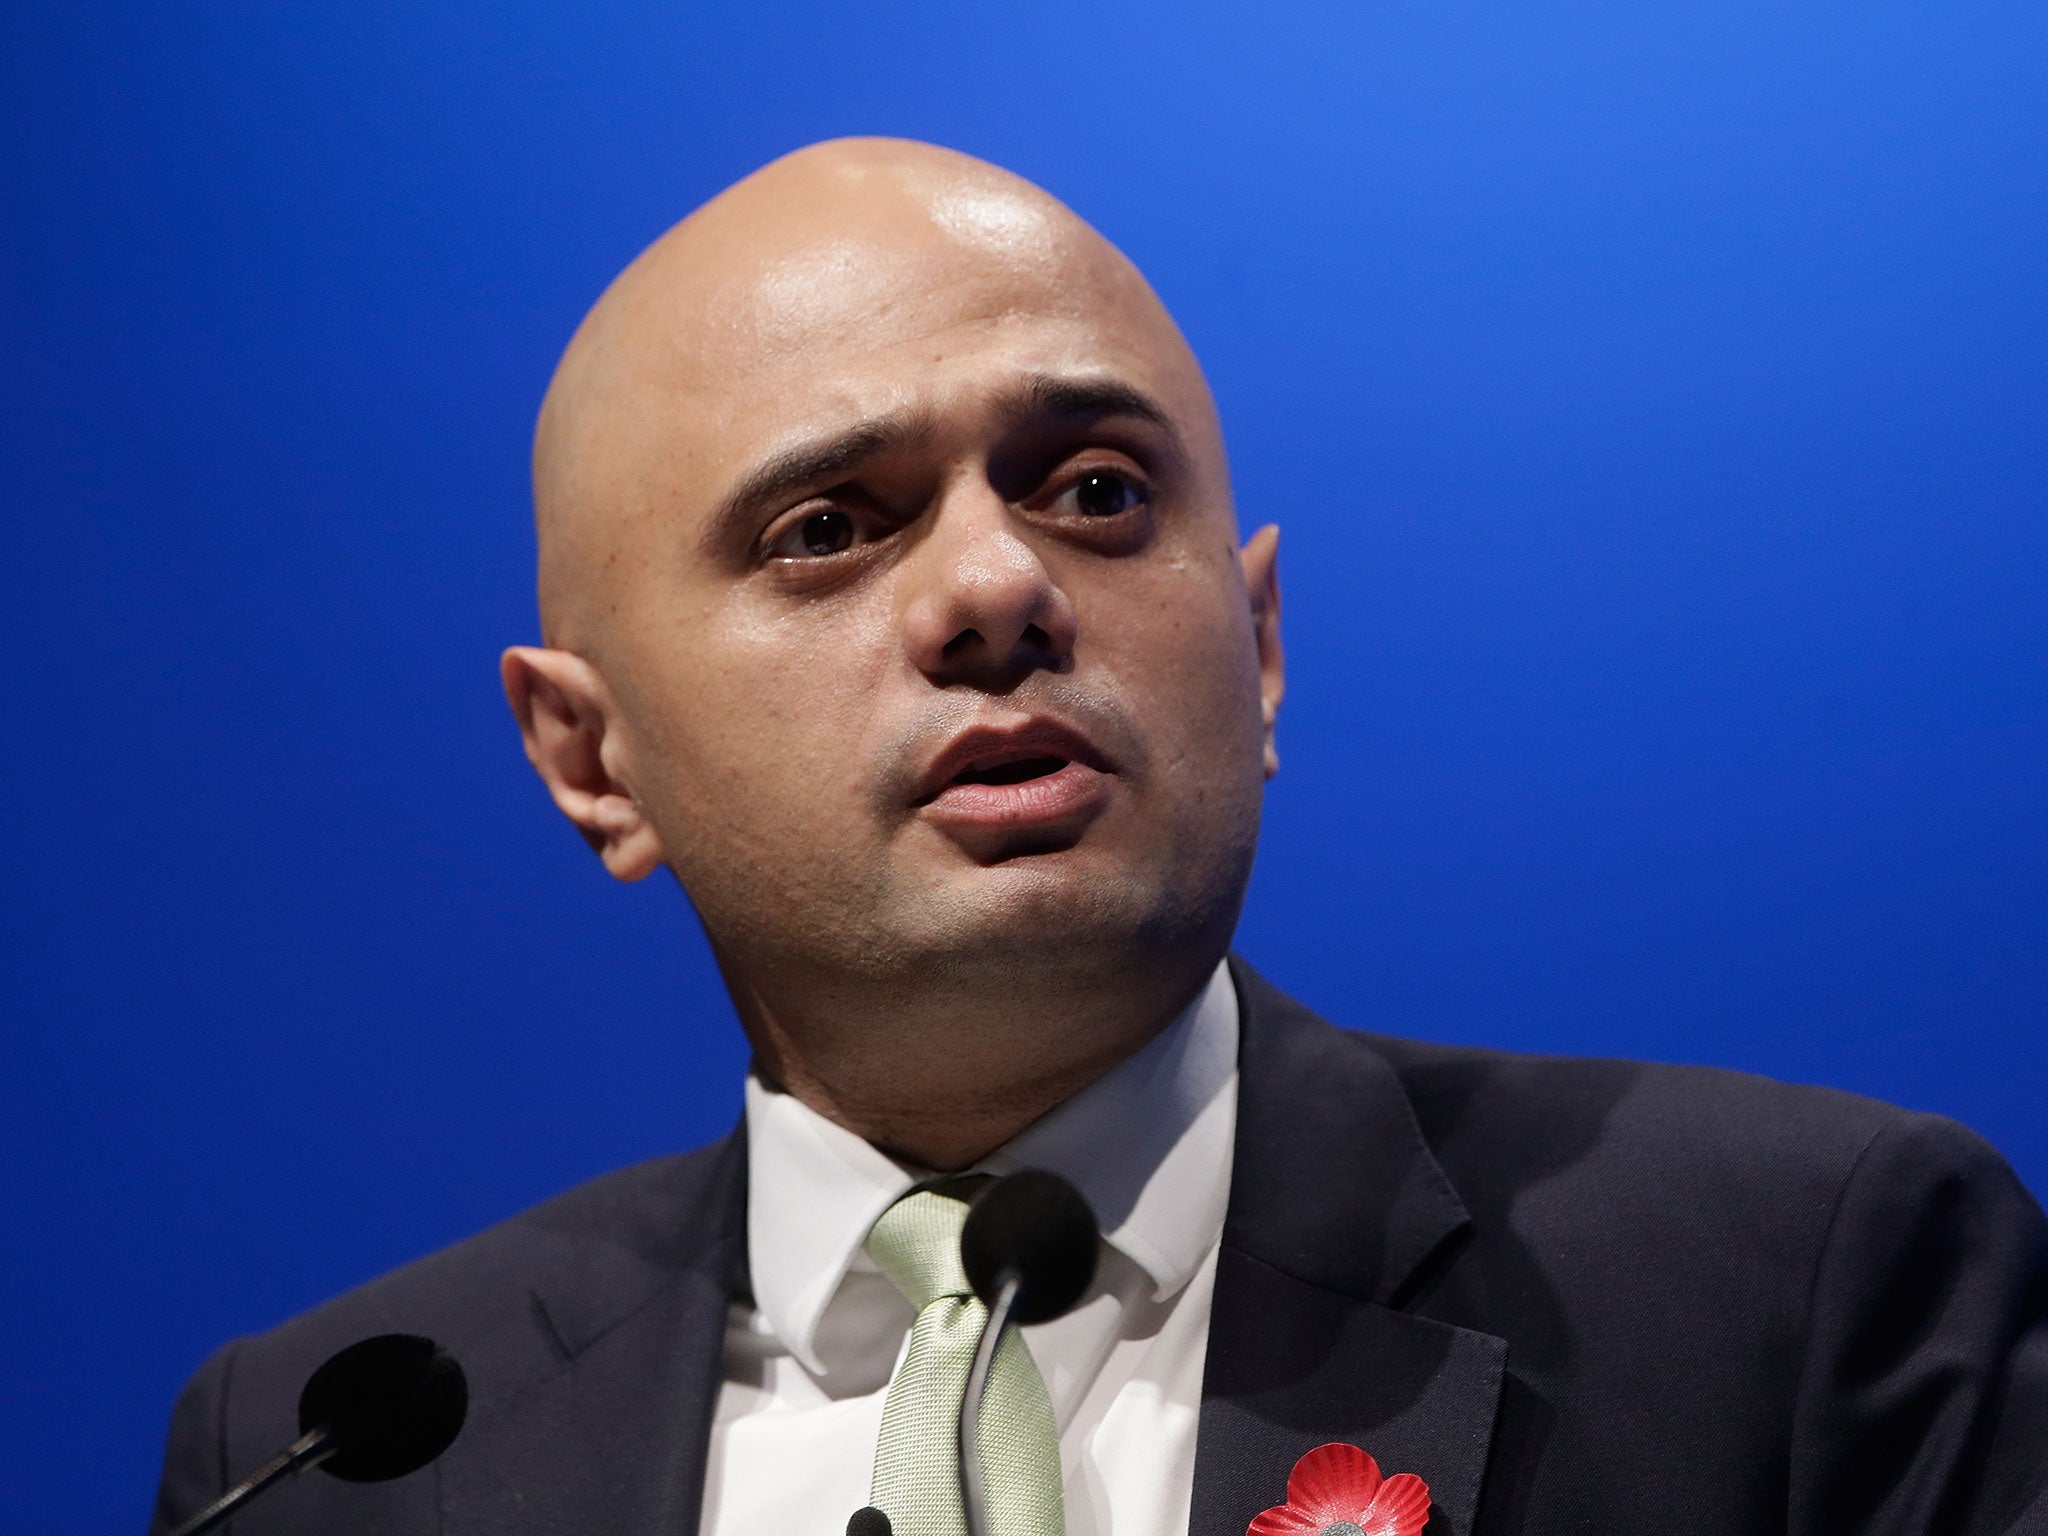 The new Business Secretary Sajid Javid is second favourite among Tory activists behind Boris Johnson to become the party’s next leader